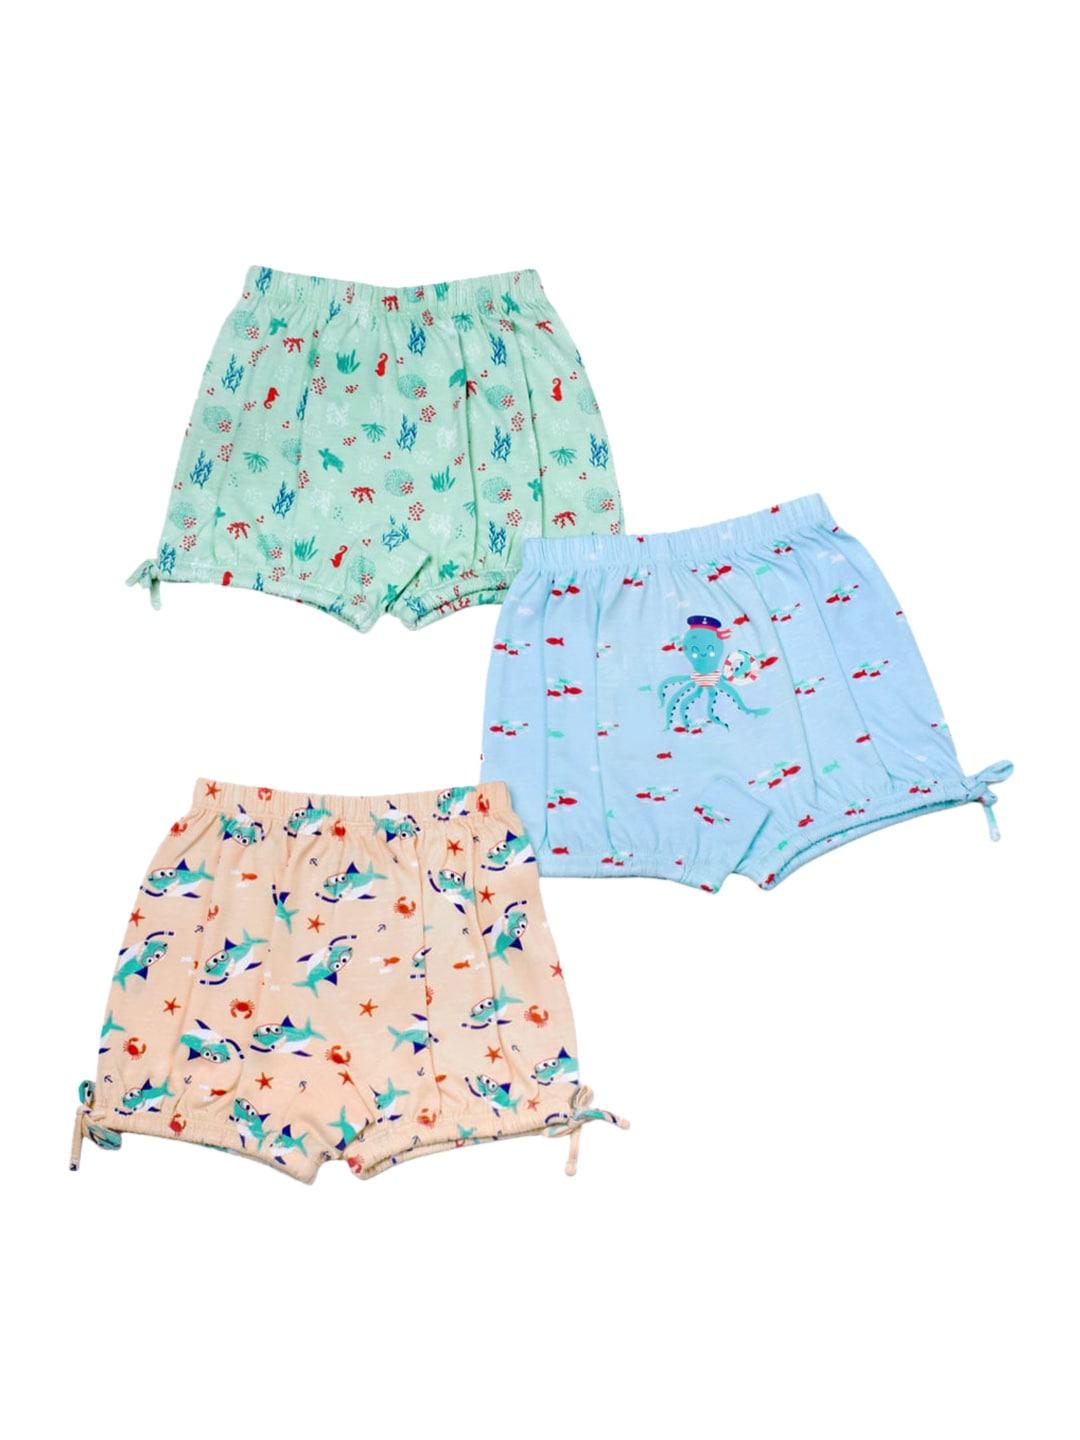 superbottoms pack of 3 kids printed sustainable briefs - und-u-bl-ss-2_3- 3pack